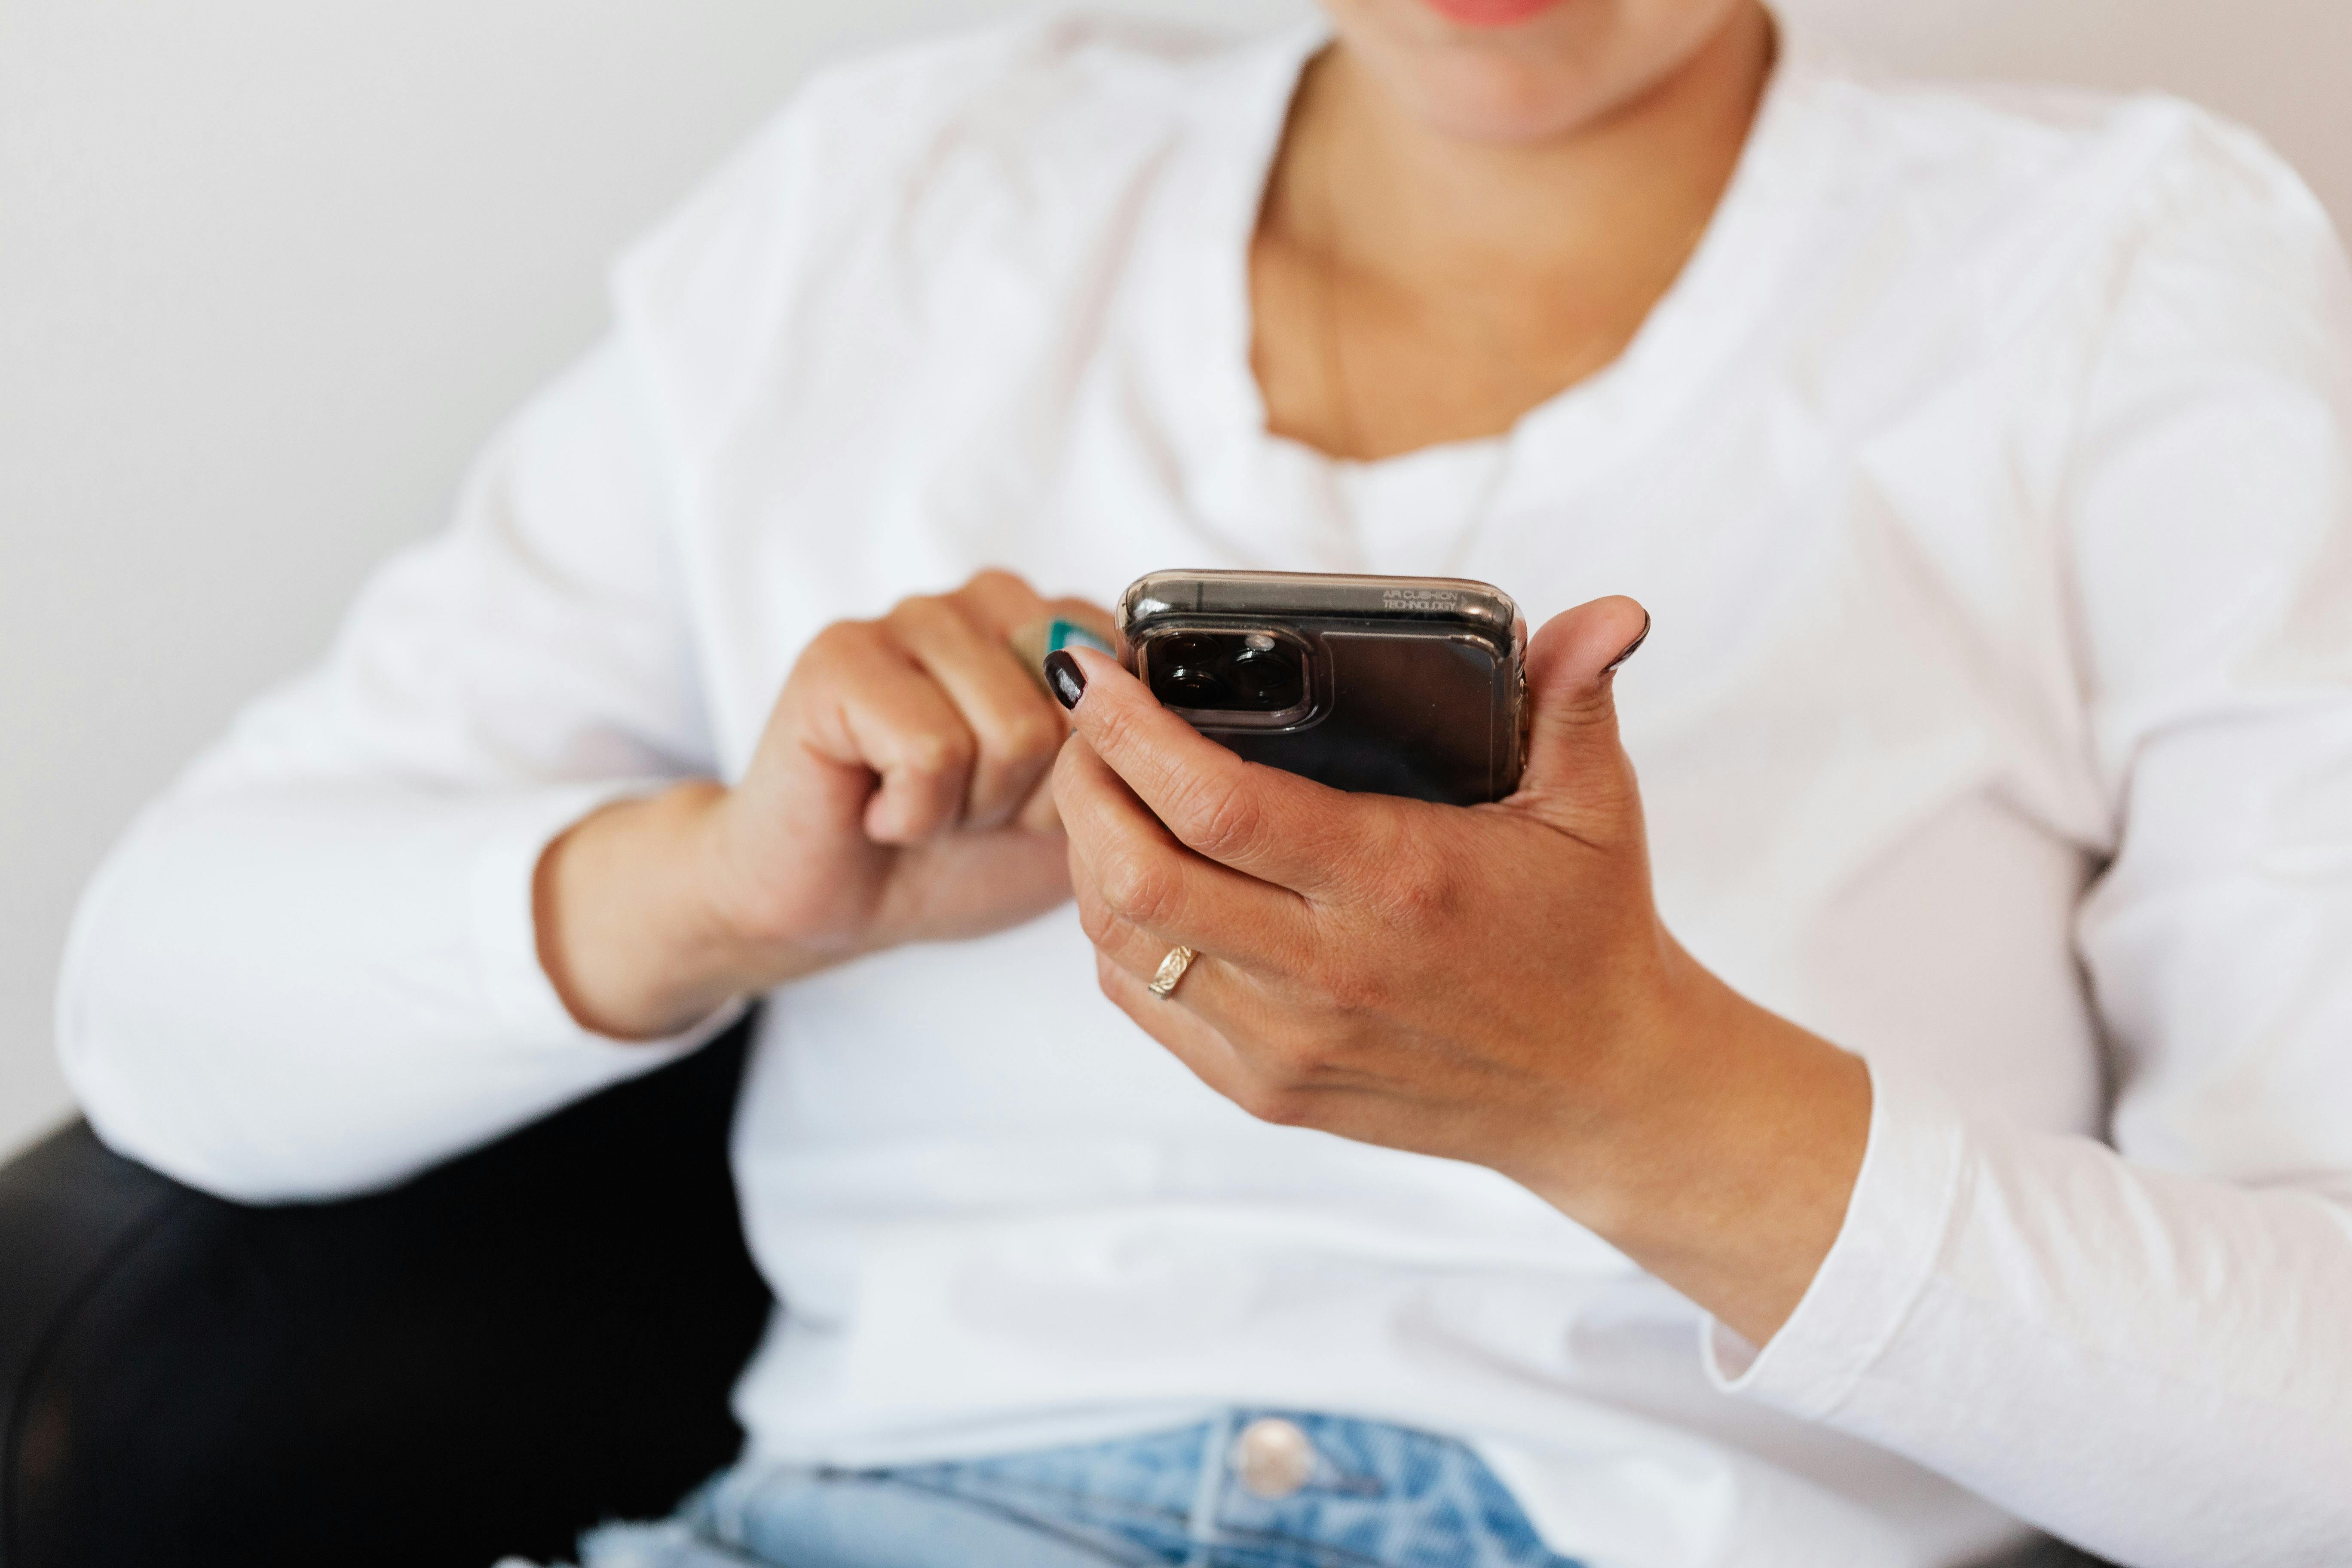 A phone in a married woman's hand | Source: Pexels